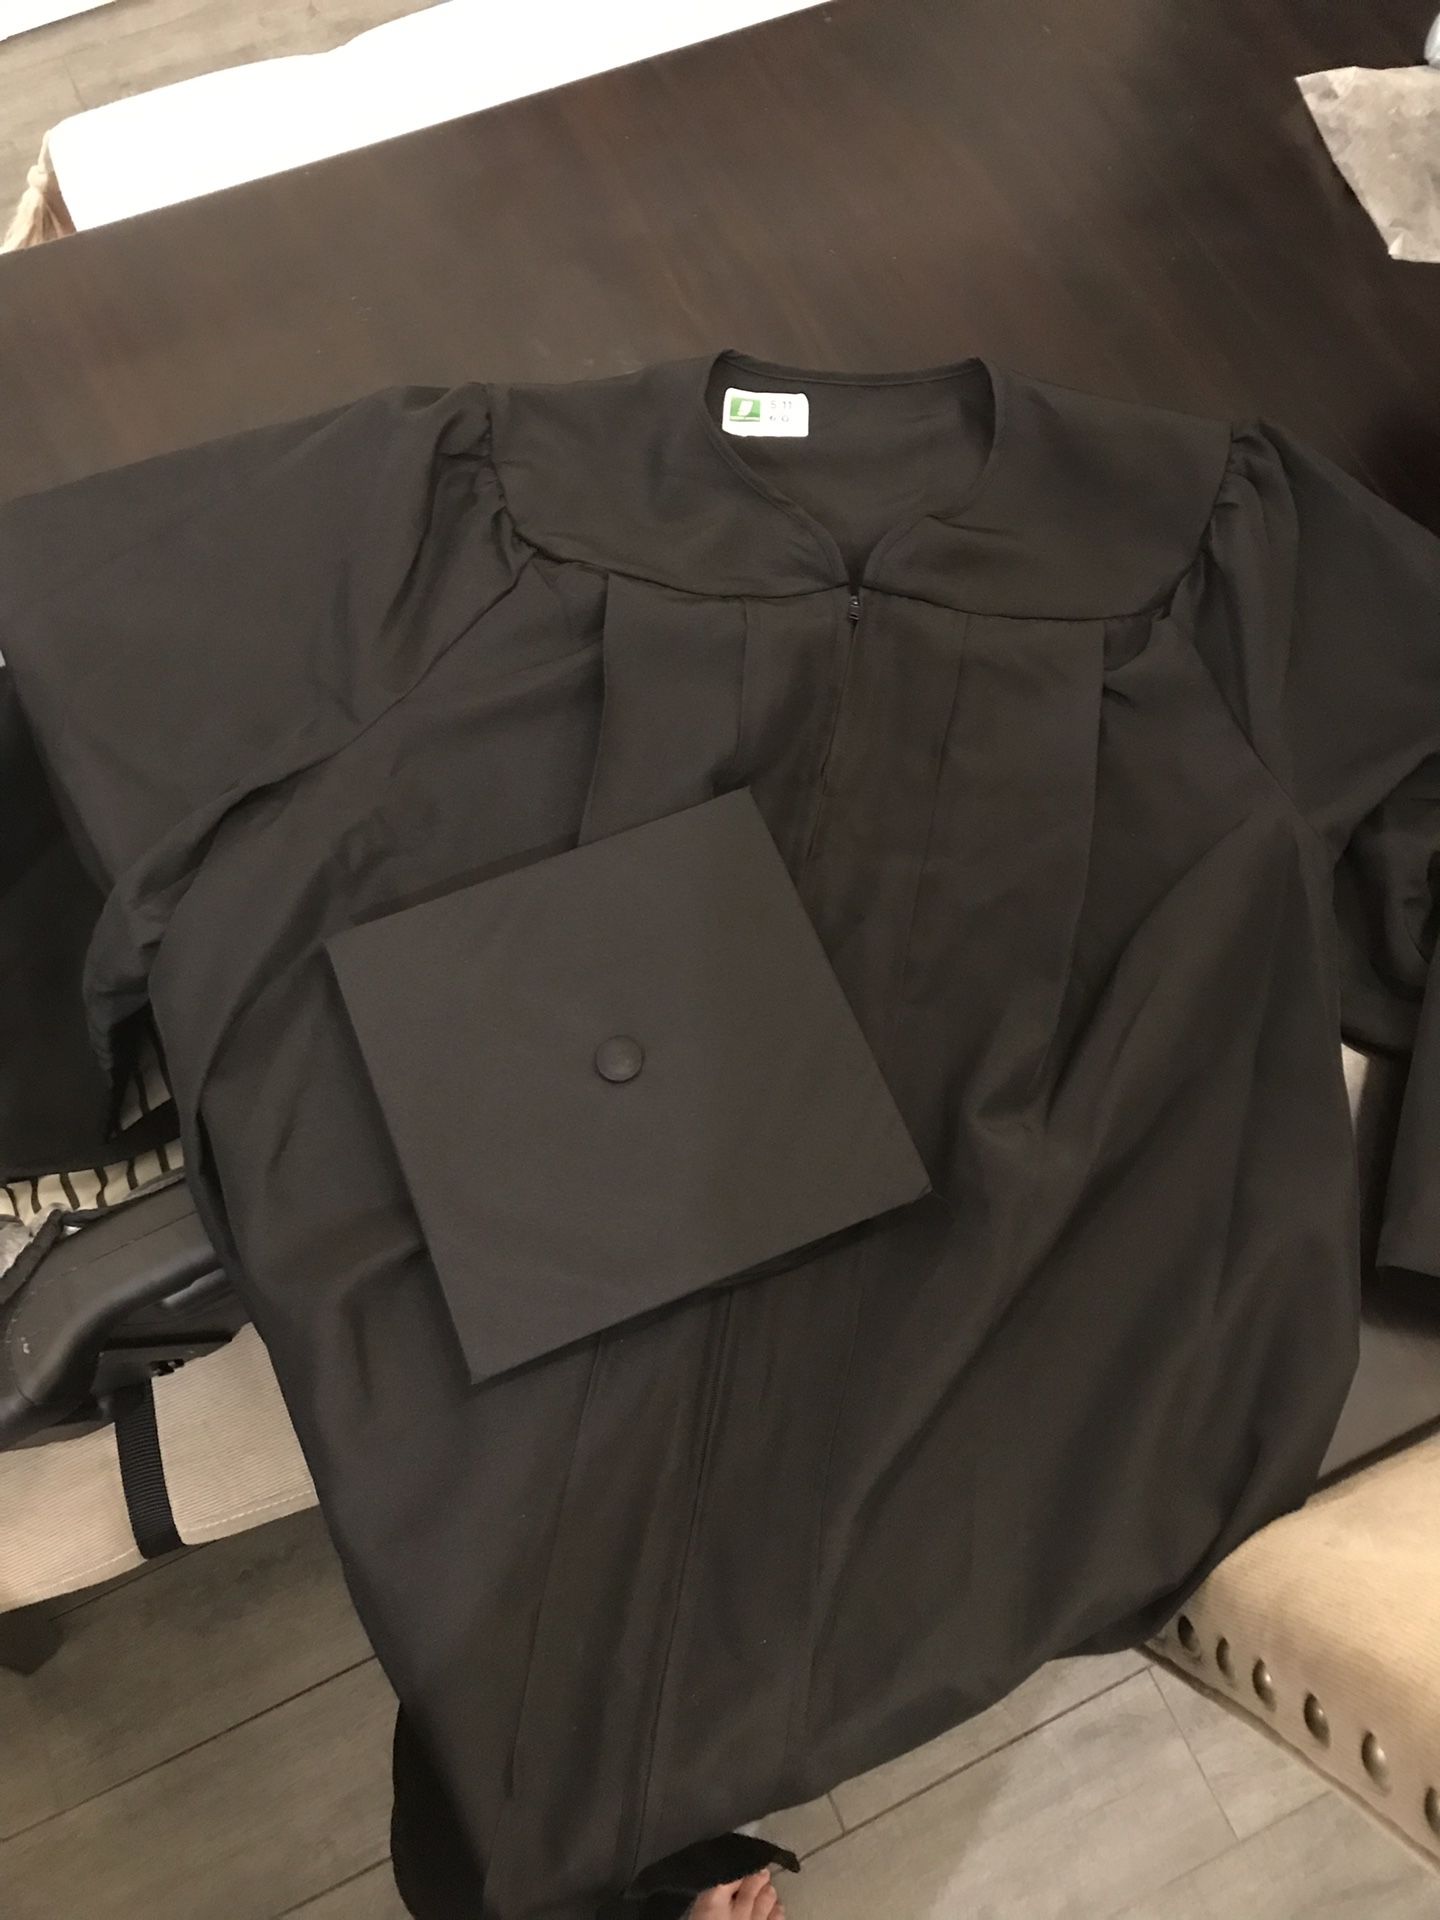 Solid black graduation cap and gown 5’11”